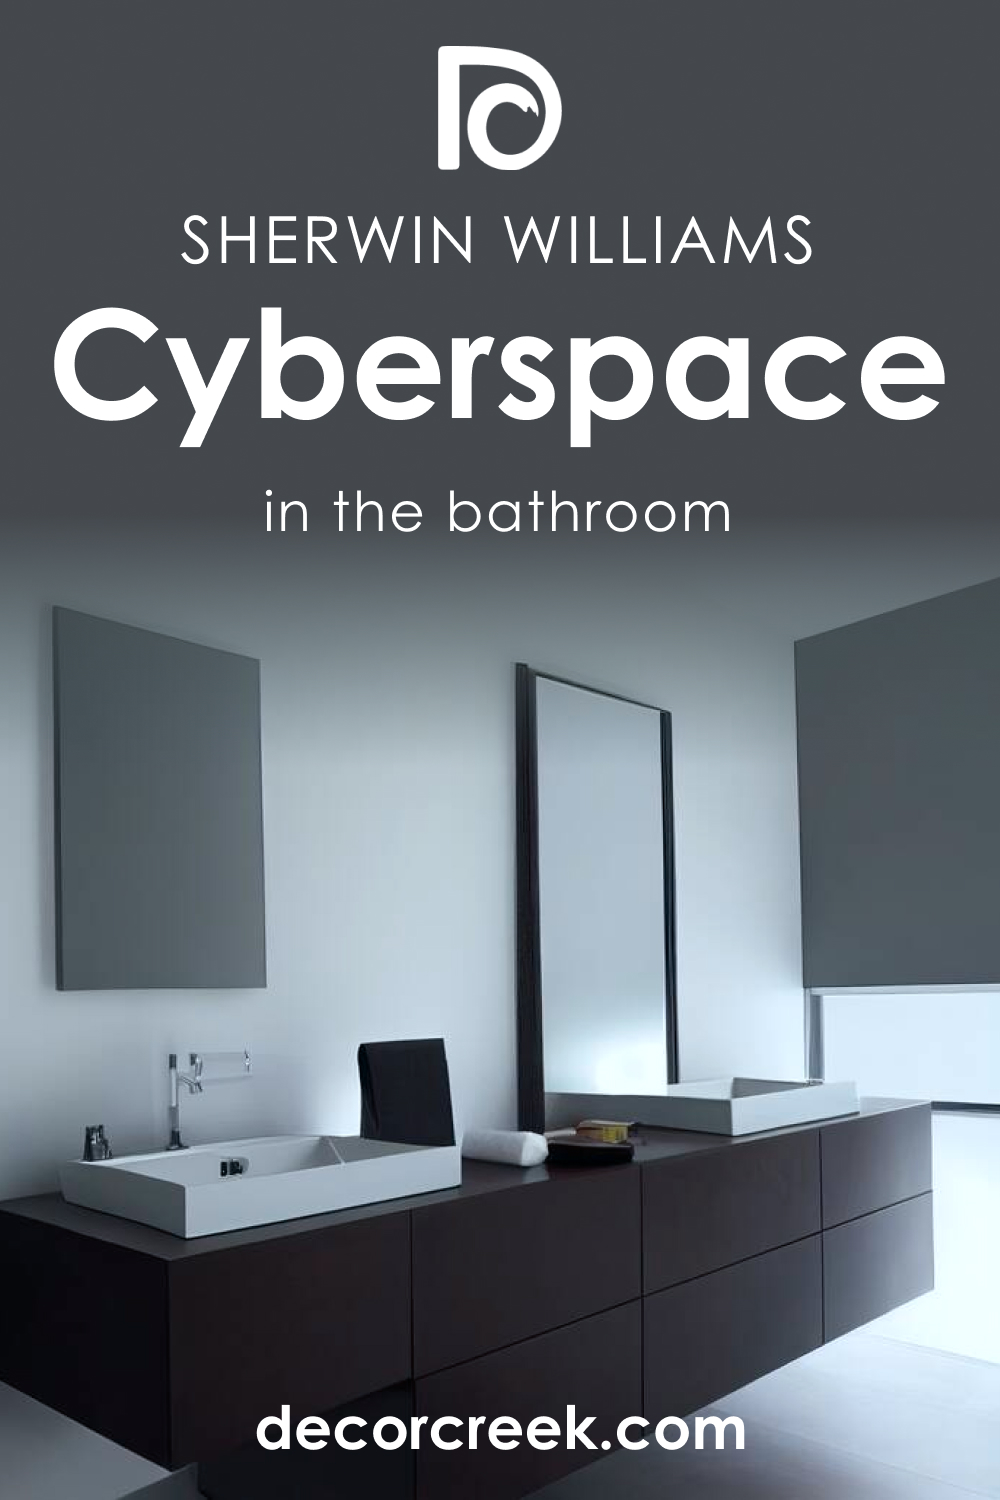 How to Use SW 7076 Cyberspace in the Bathroom?